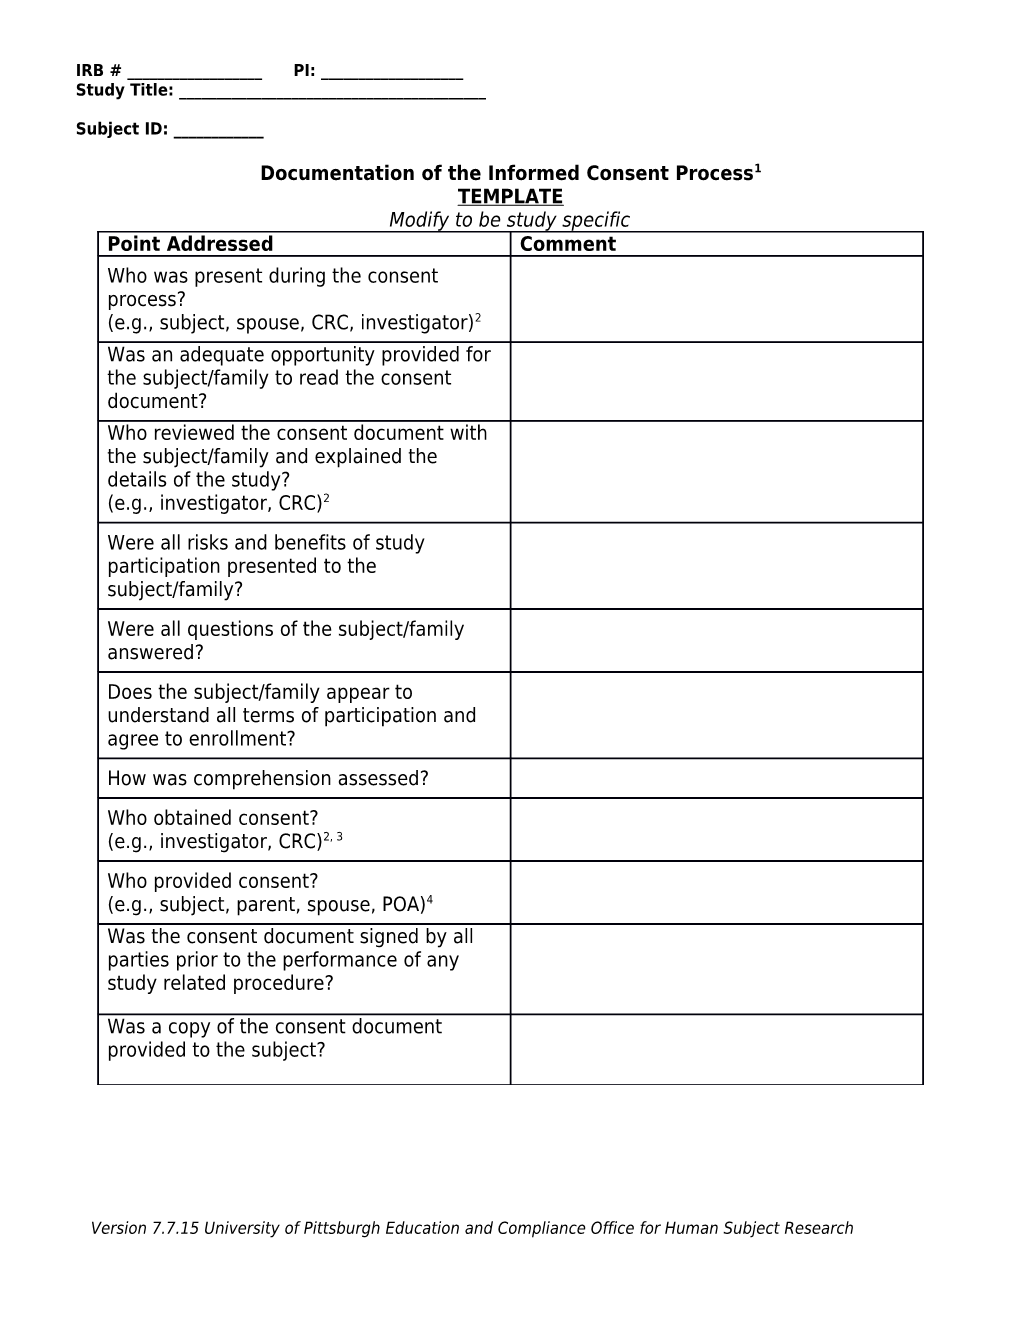 Documentation of the Informed Consent Process1